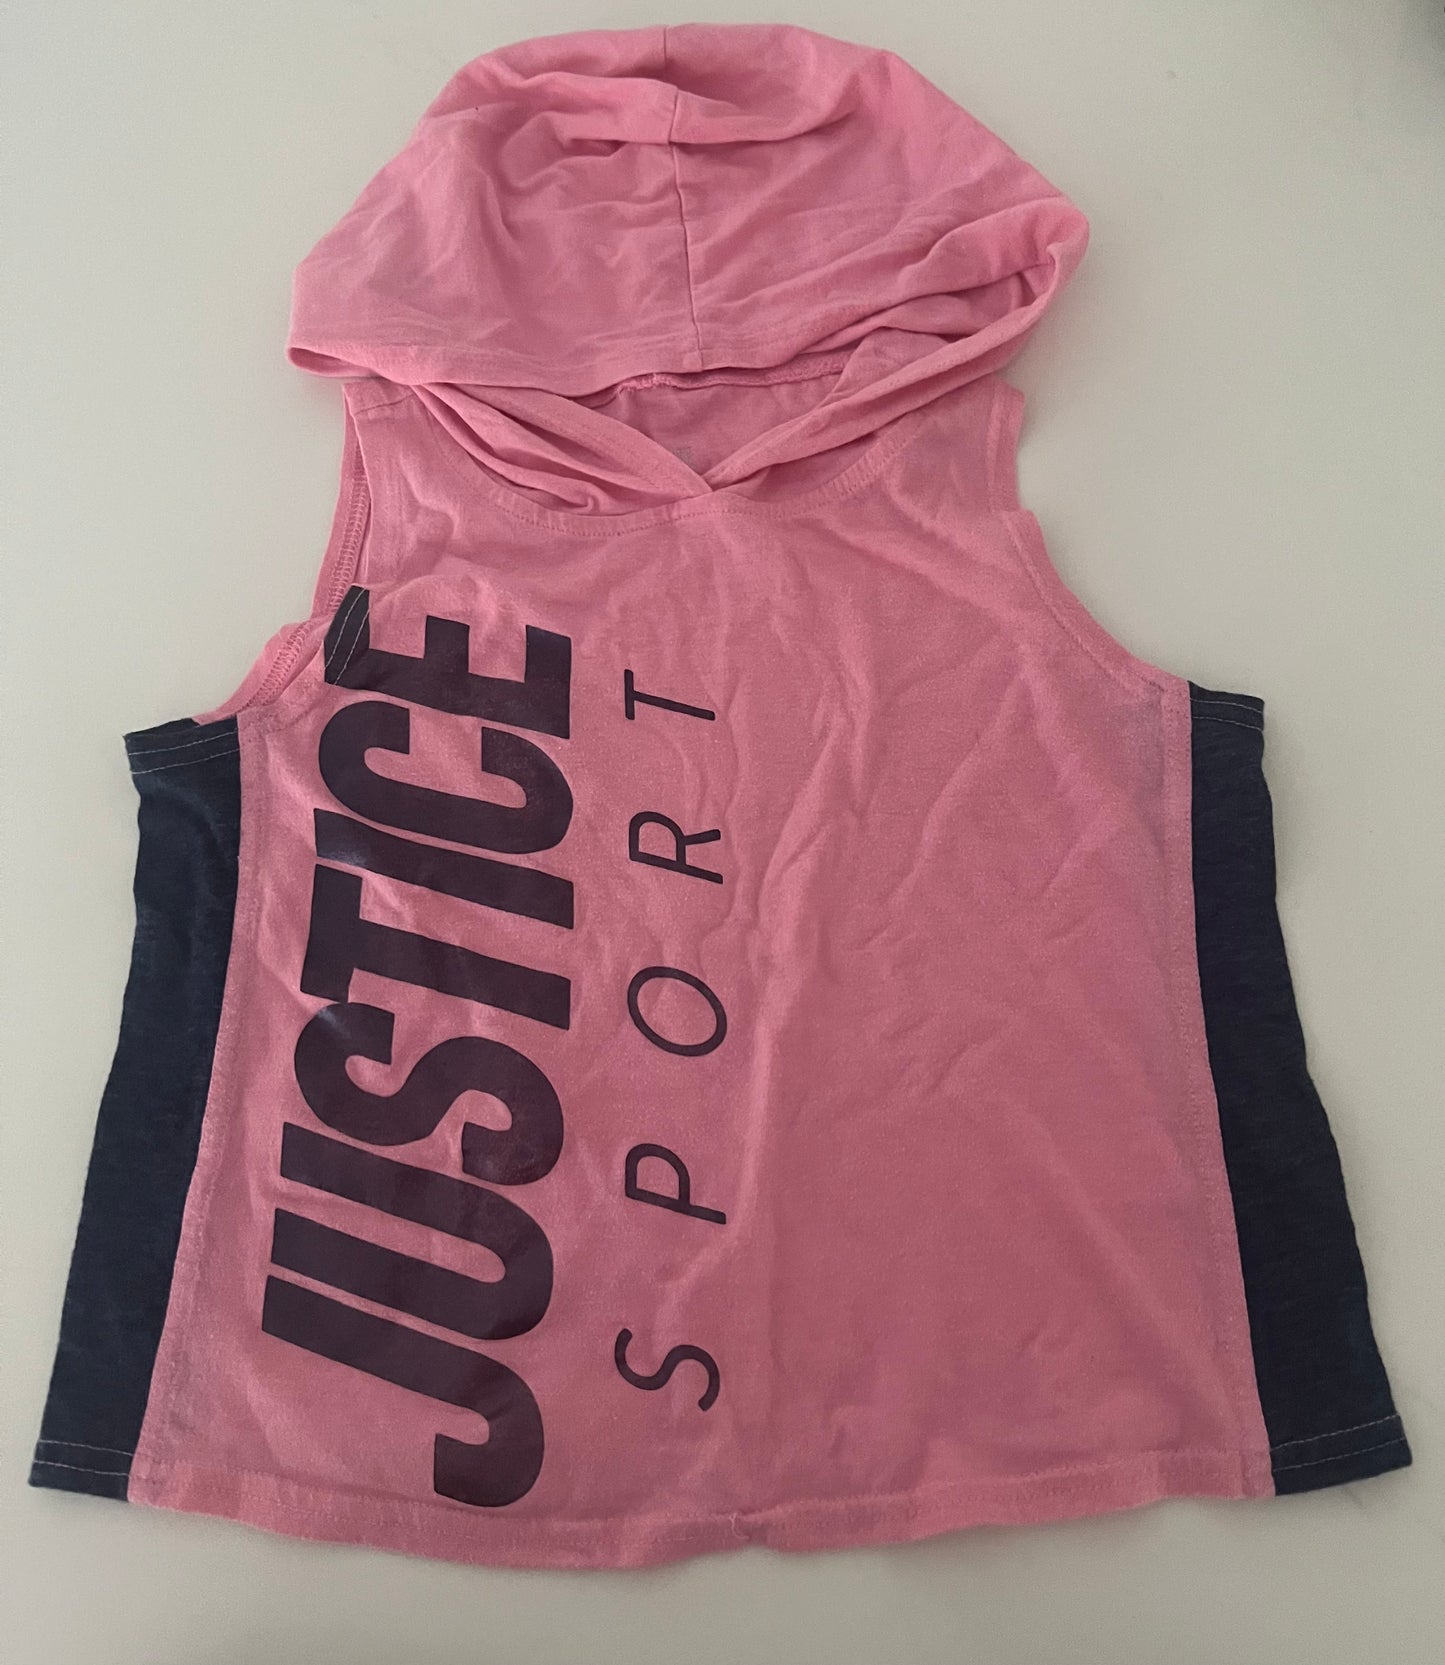 Justice Sport Hooded sleeveless top - Girls 10